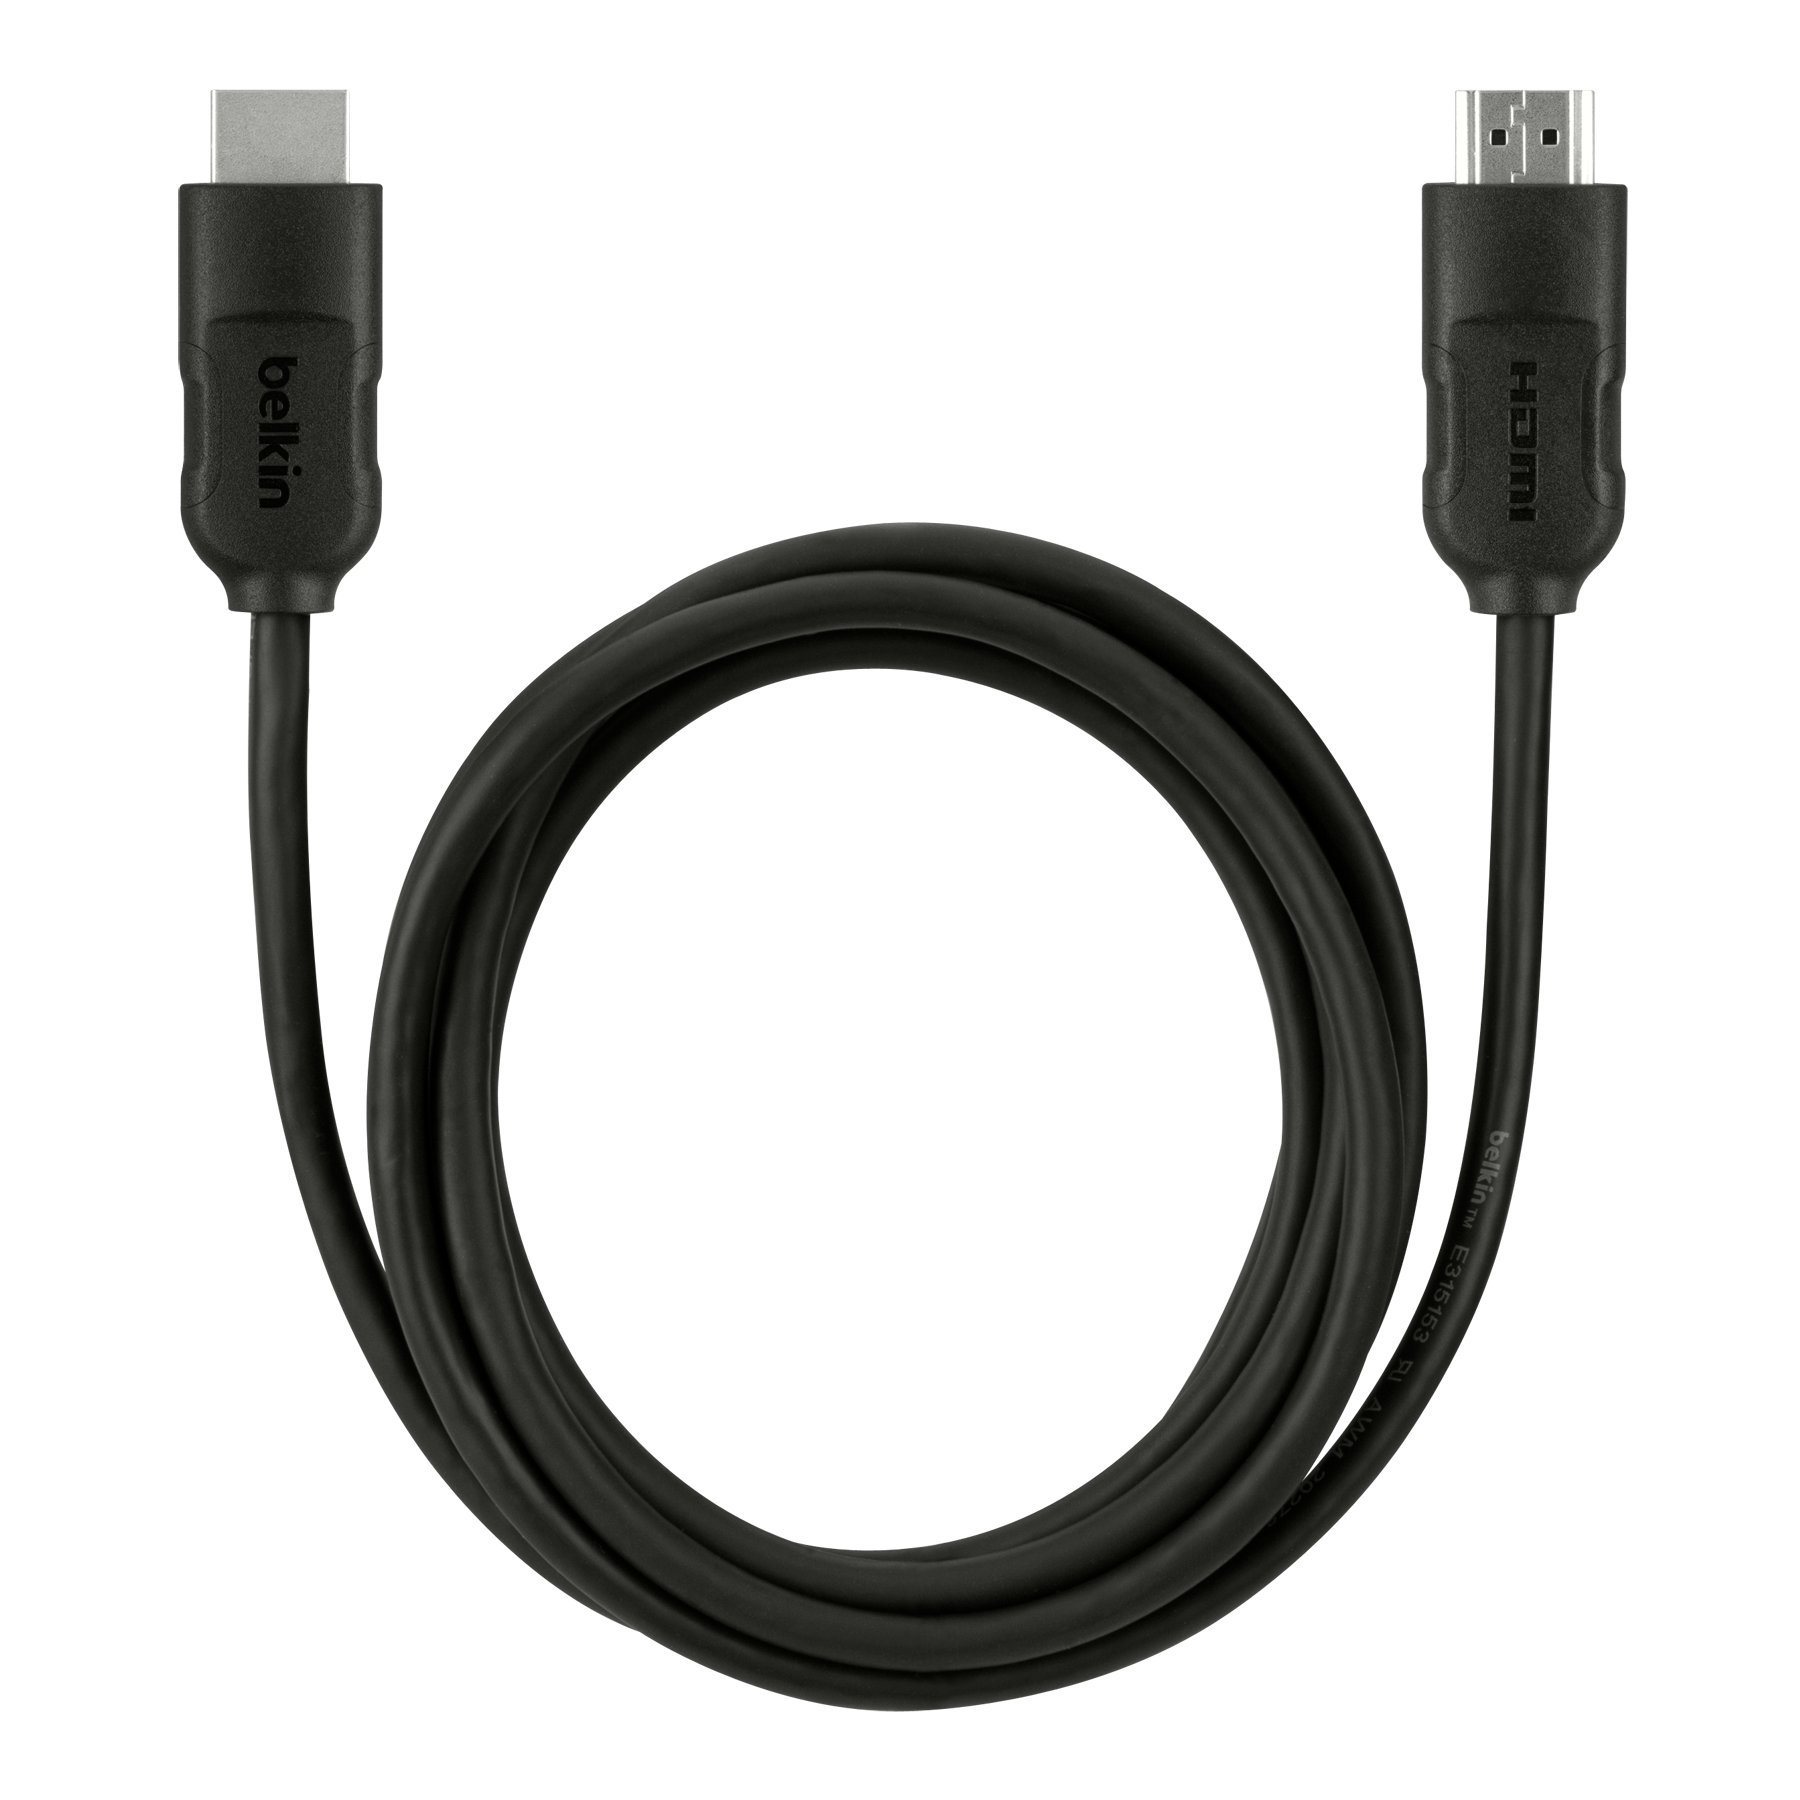 Belkin HDMI to HDMI Cable (Supports Amazon Fire TV and other HDMI-Enabled Devices), HDMI 2.0 / 4K Compatible, 6 Feet